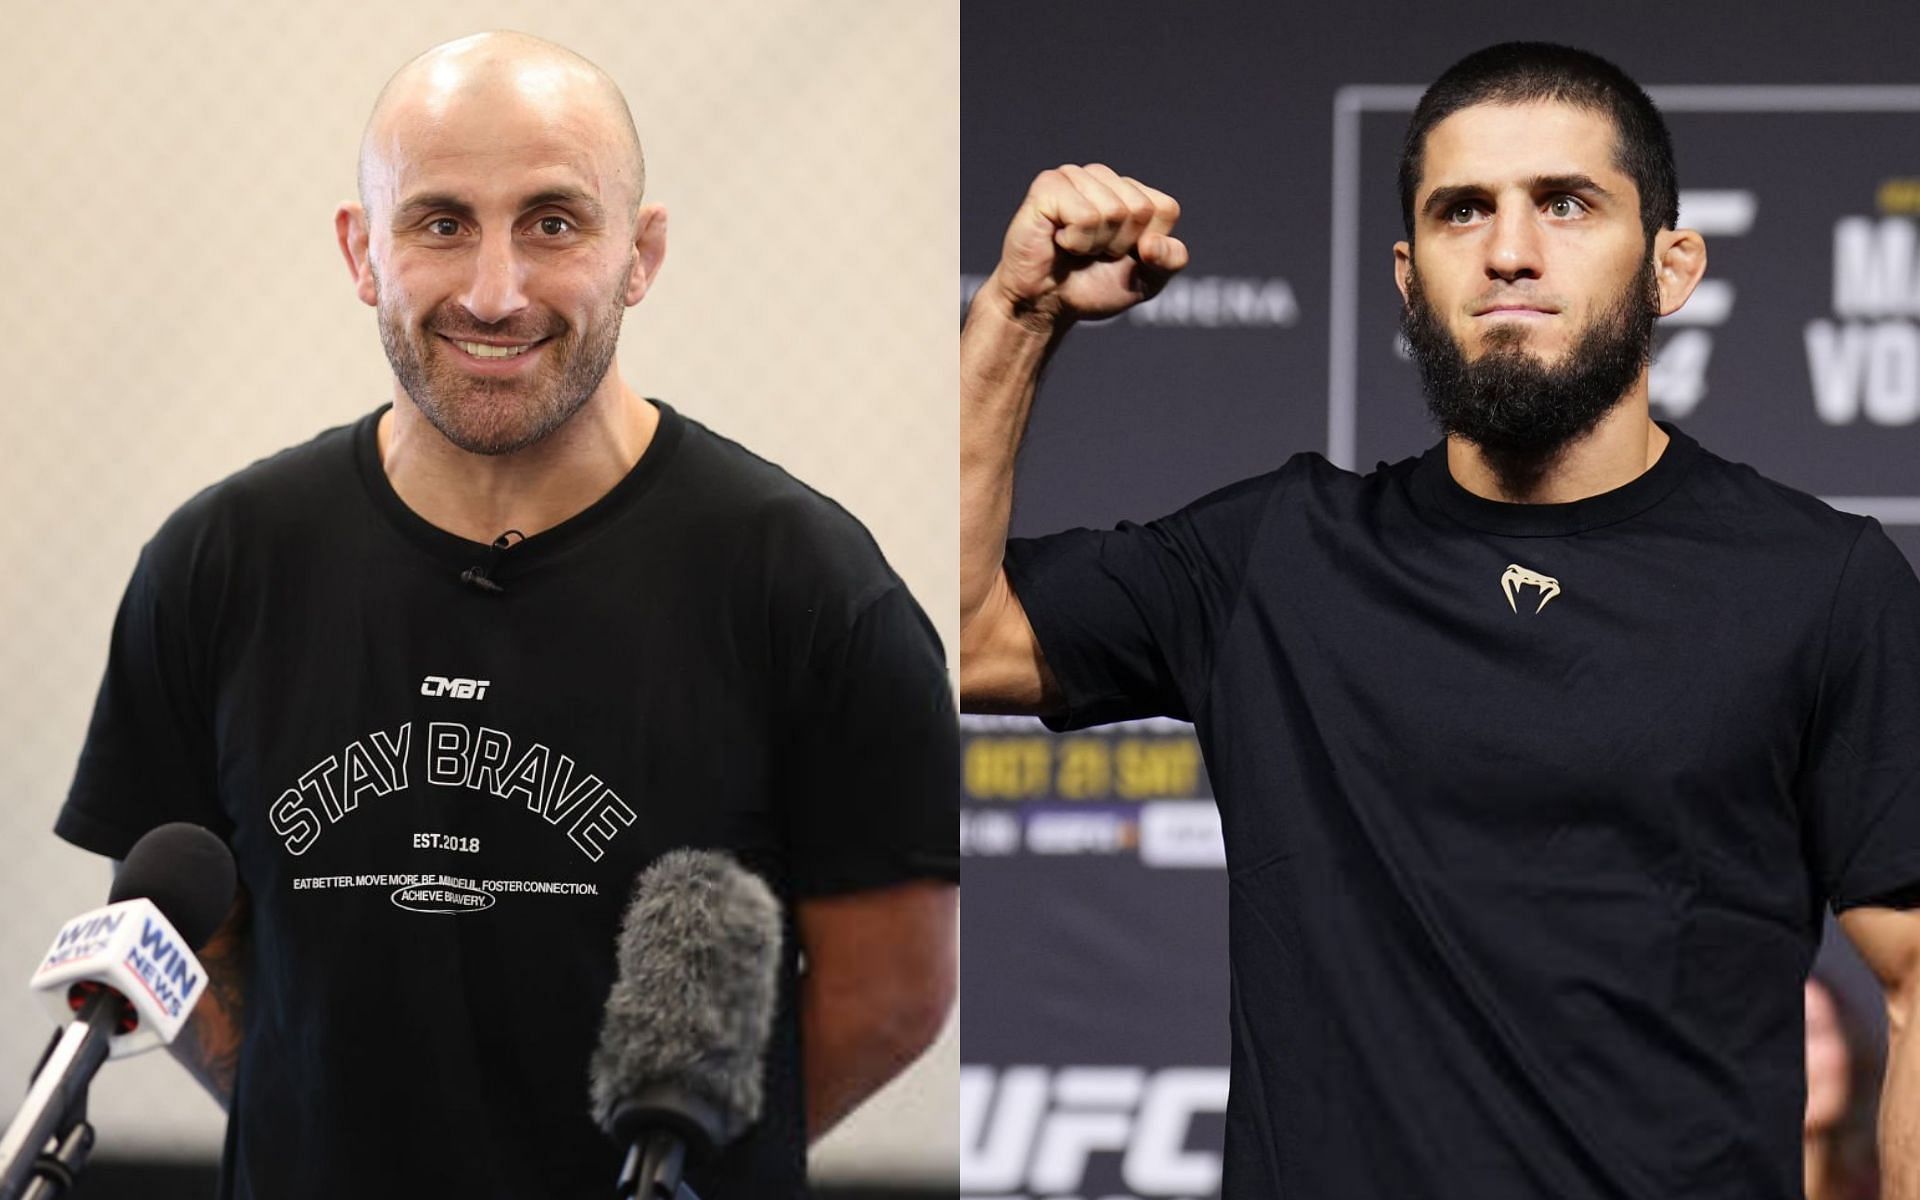 Alexander Volkanovski (left) and Islam Makhachev (right) [Images Courtesy: @GettyImages]